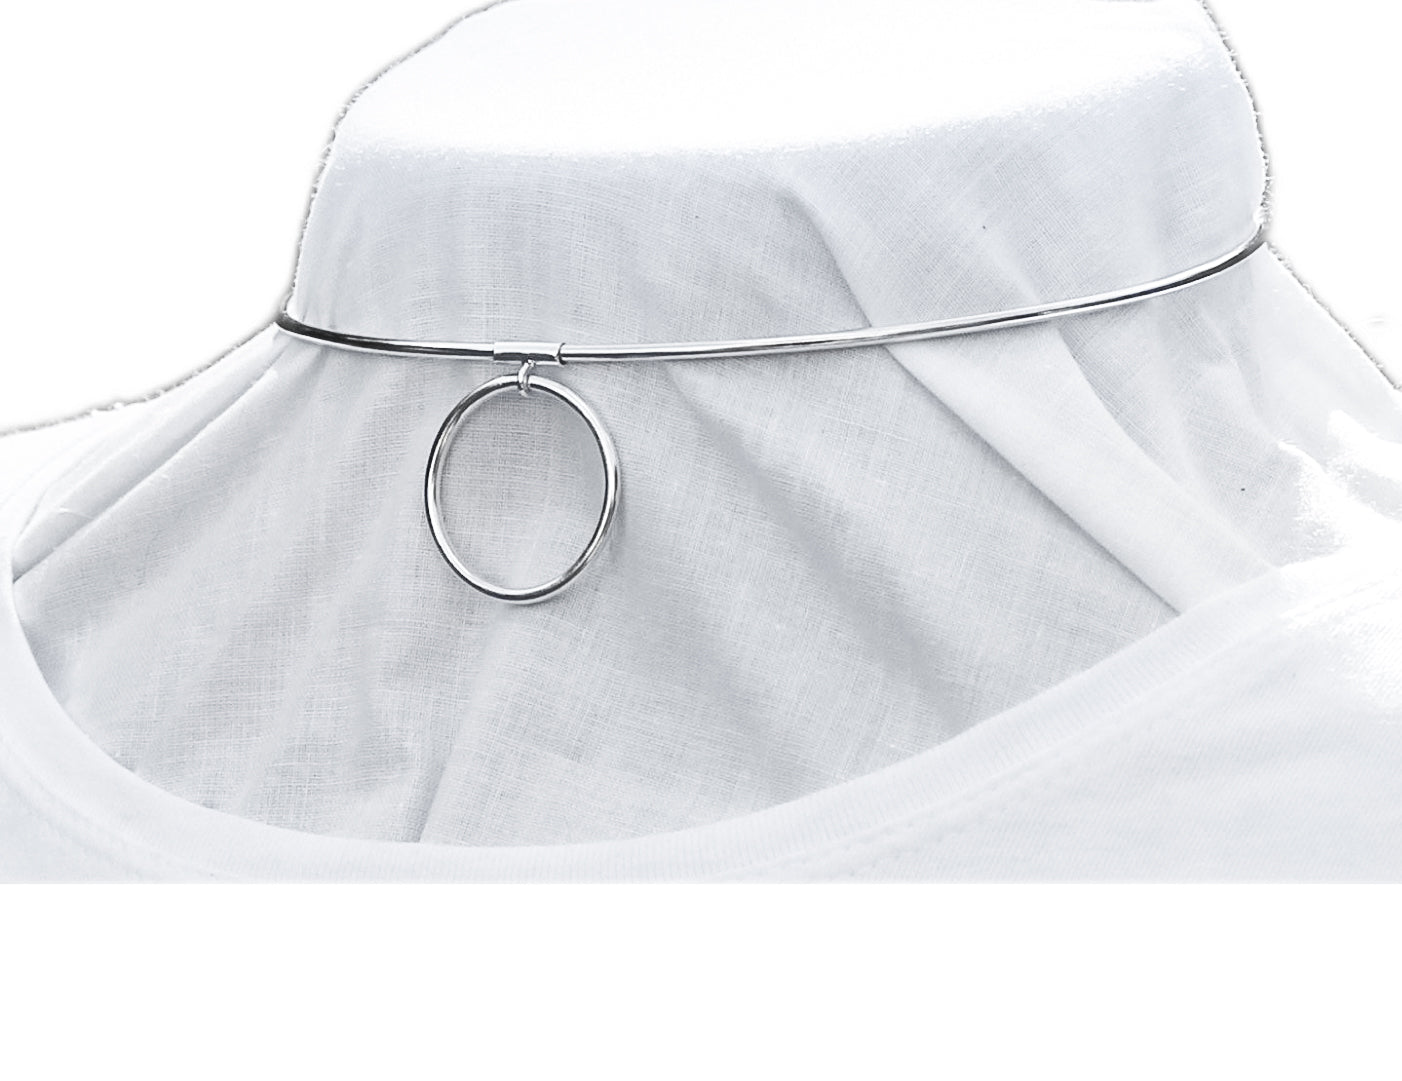 This Discreet Submissive Solid Sterling Silver (925) Day collar necklace is perfect for those that want to make a statement, or be discreet. The collar compliments both casual and formal wear, making it an excellent choice for a day/evening collar. The inside diameter of the sterling silver O ring is just over 25 mm and 1.5 mm thick, with a large 15 mm lobster style locking clasp to ensure you are comfortable at all times!